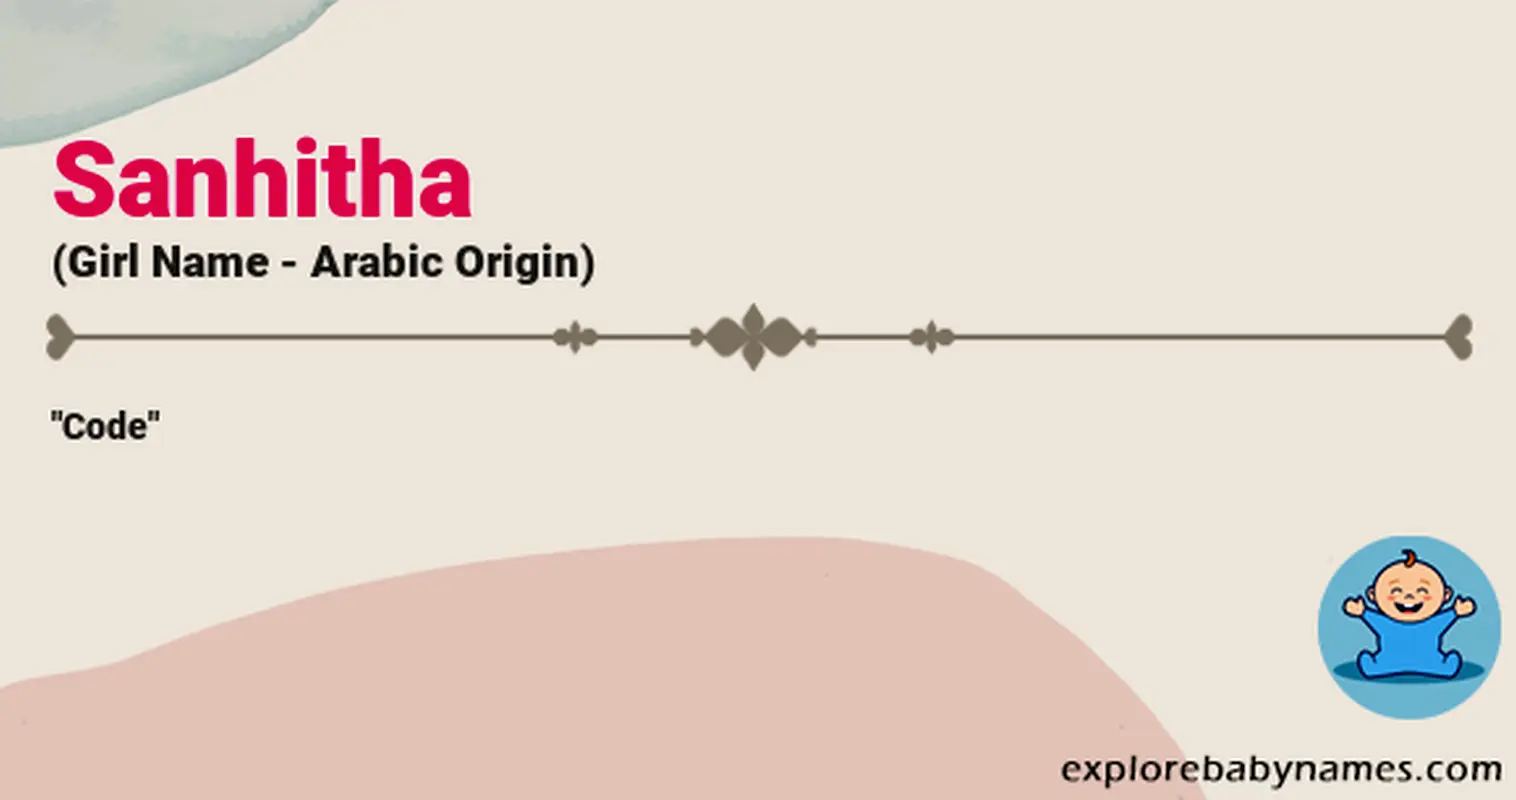 Meaning of Sanhitha